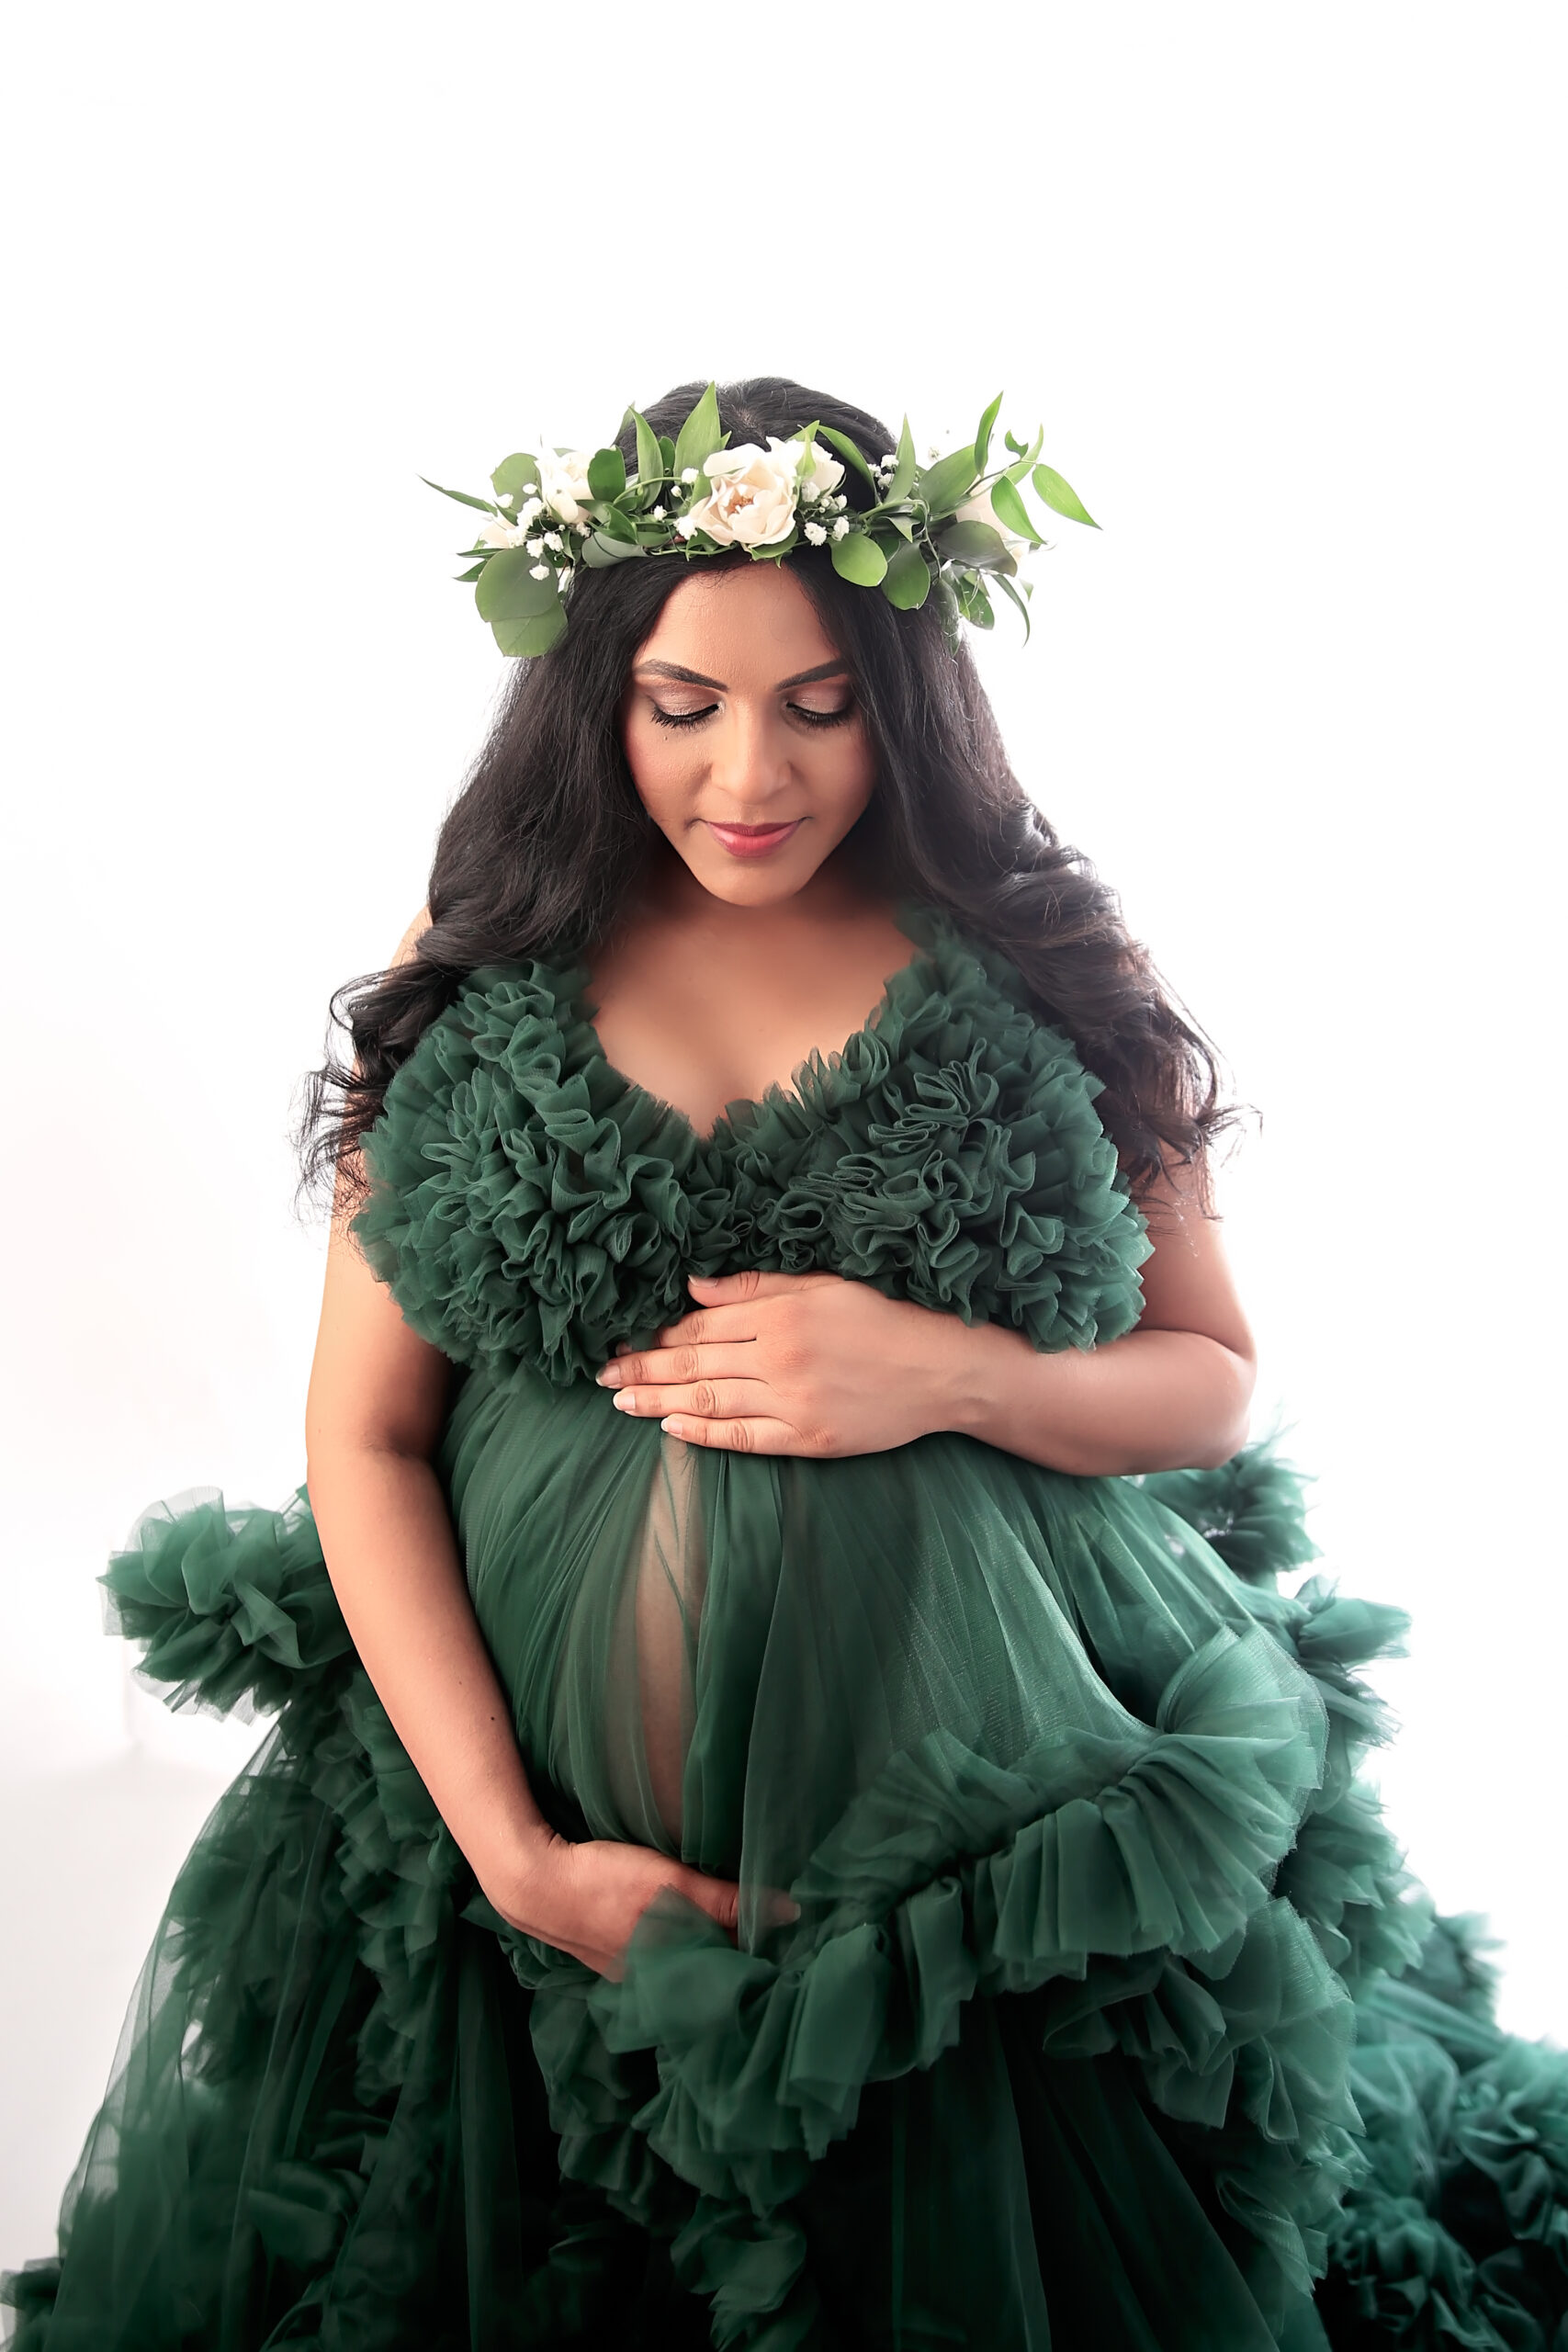 Pregnant Woman with floral crown looing down at her belly